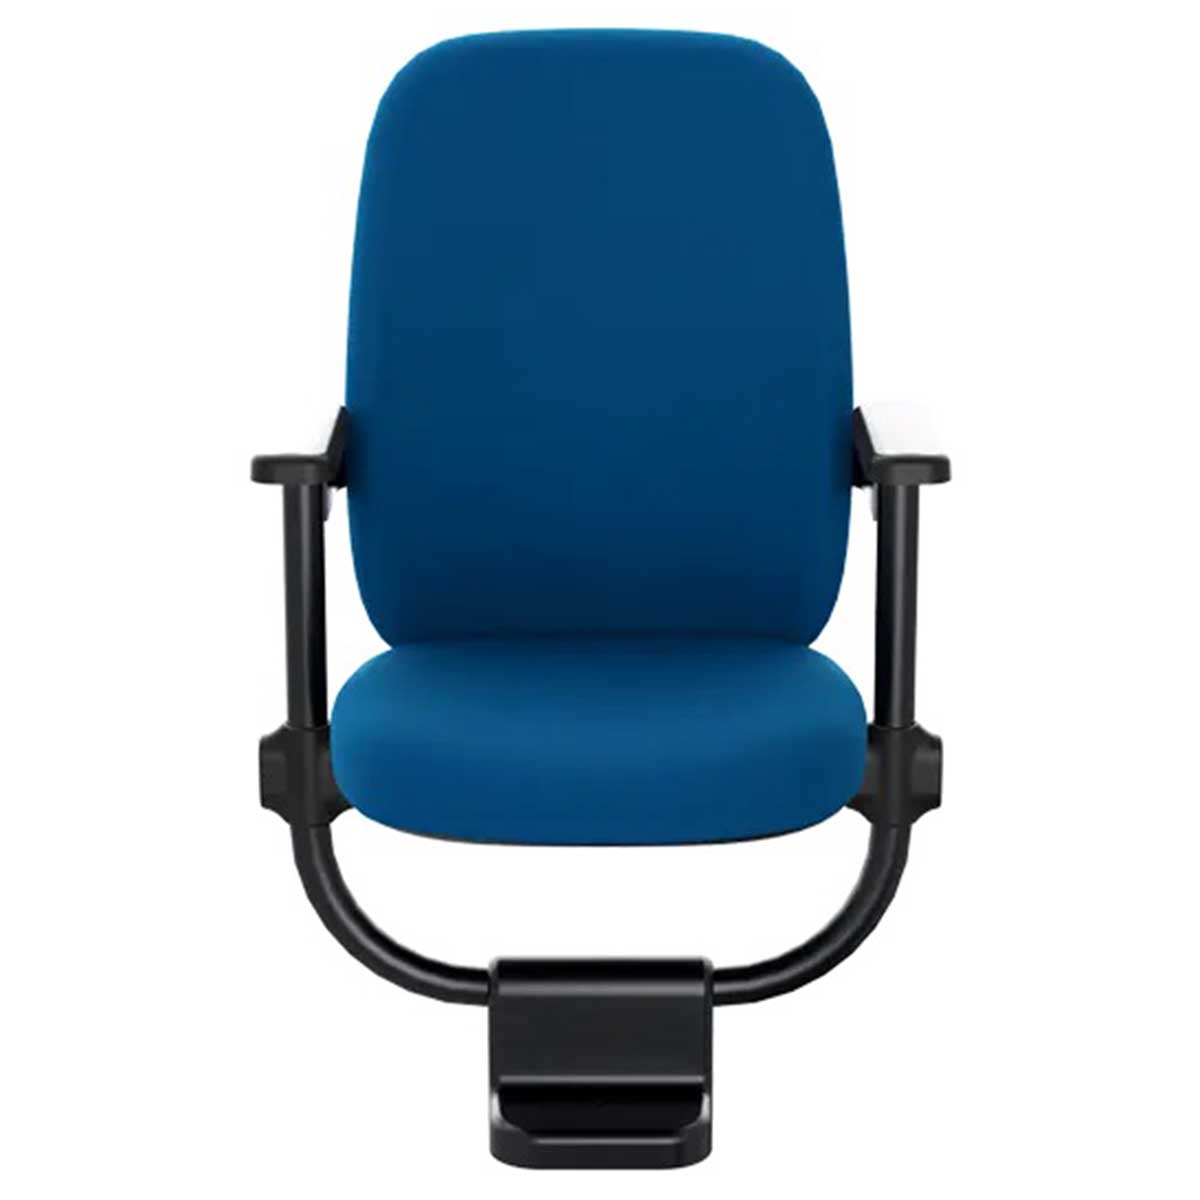 Push Back Chair Manufacturers, Suppliers in Nizamuddin